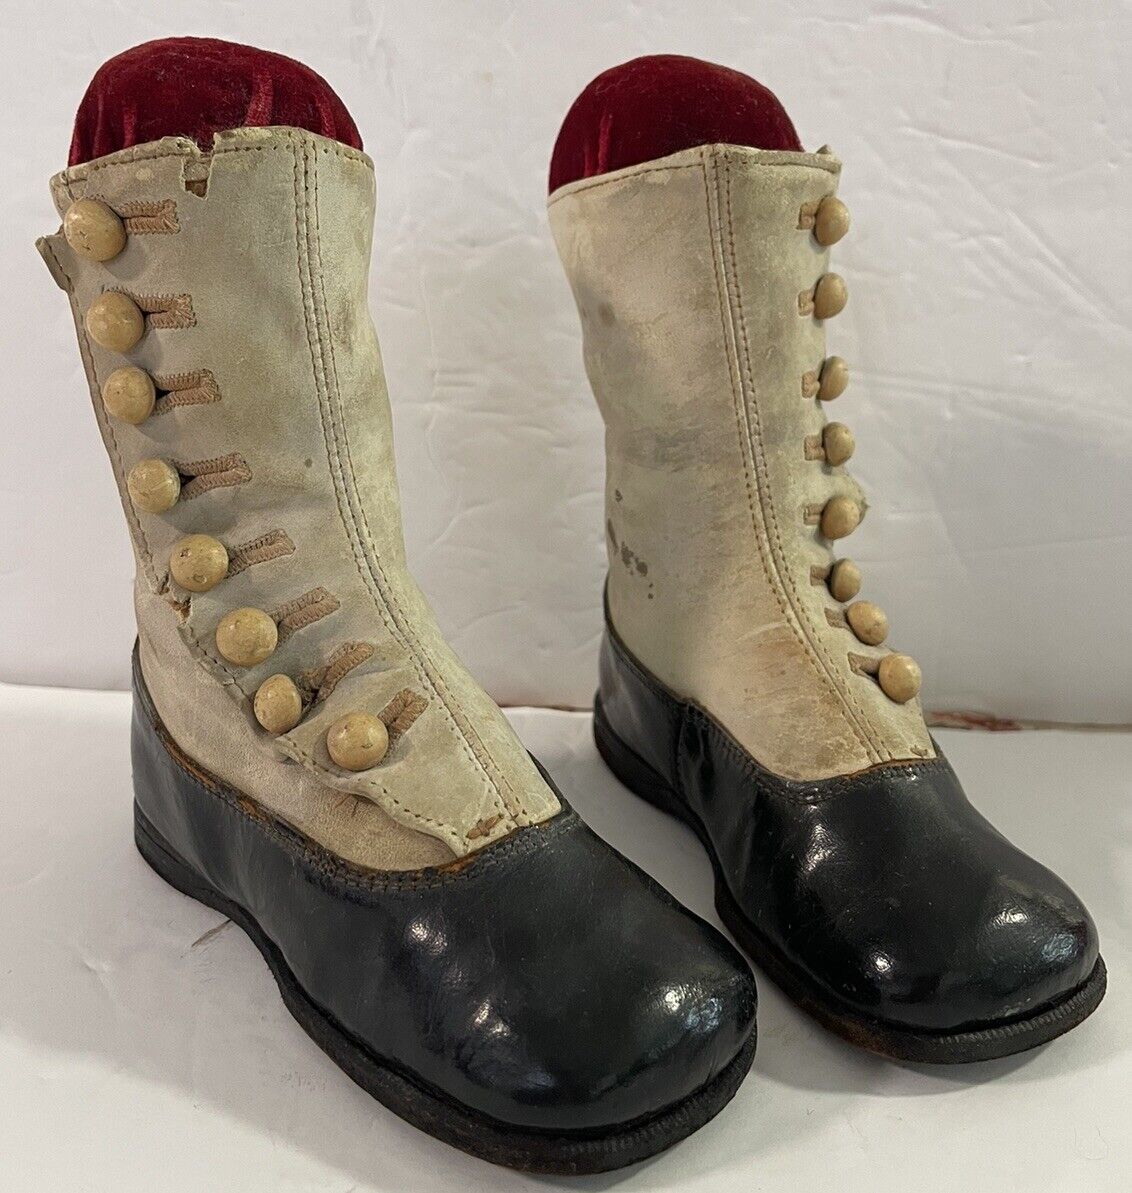 Antique Child’s Boots Booties Converted Into Pin Cushions *READ*